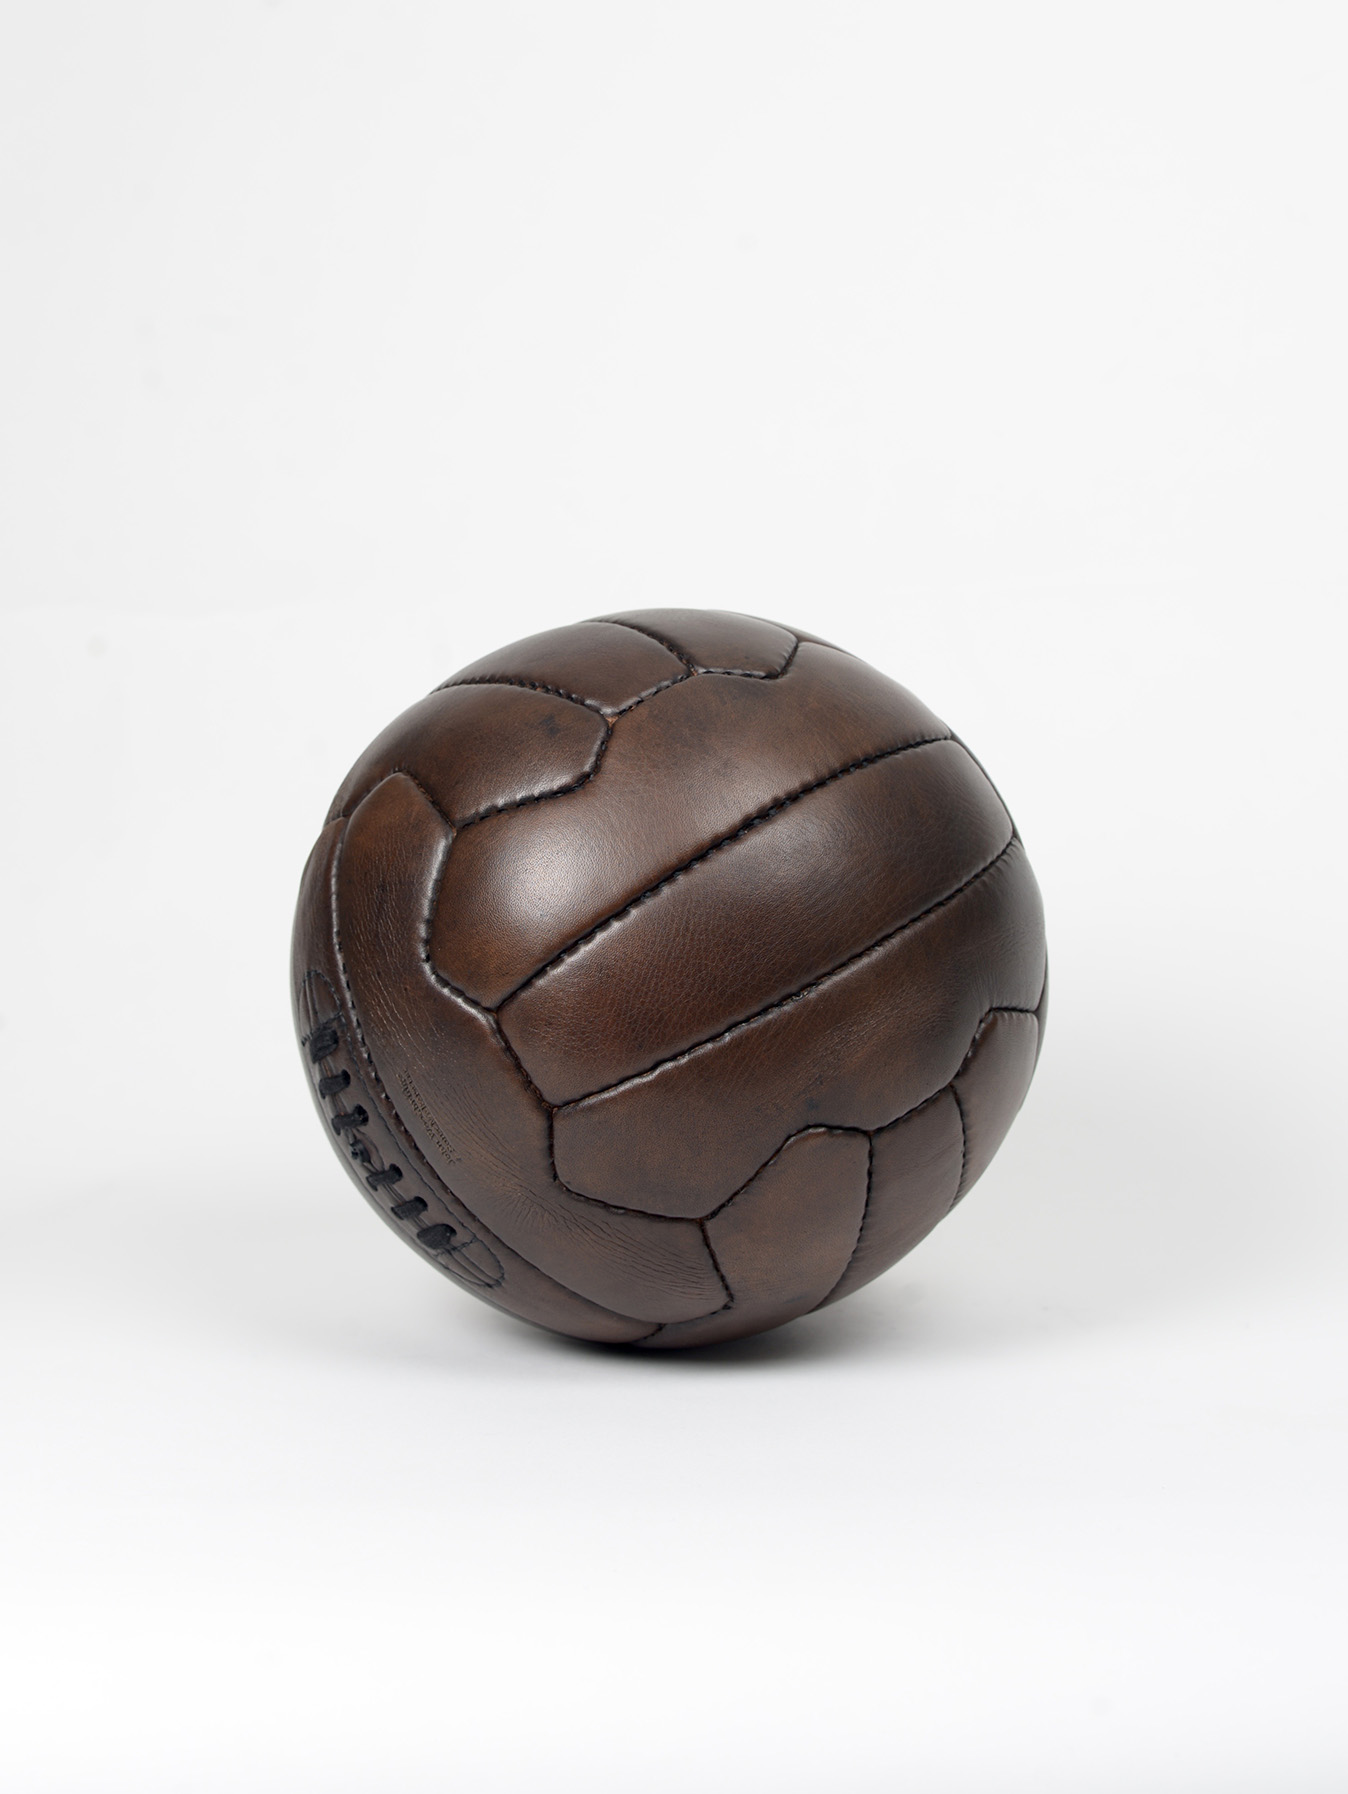 vintage leather football noble store